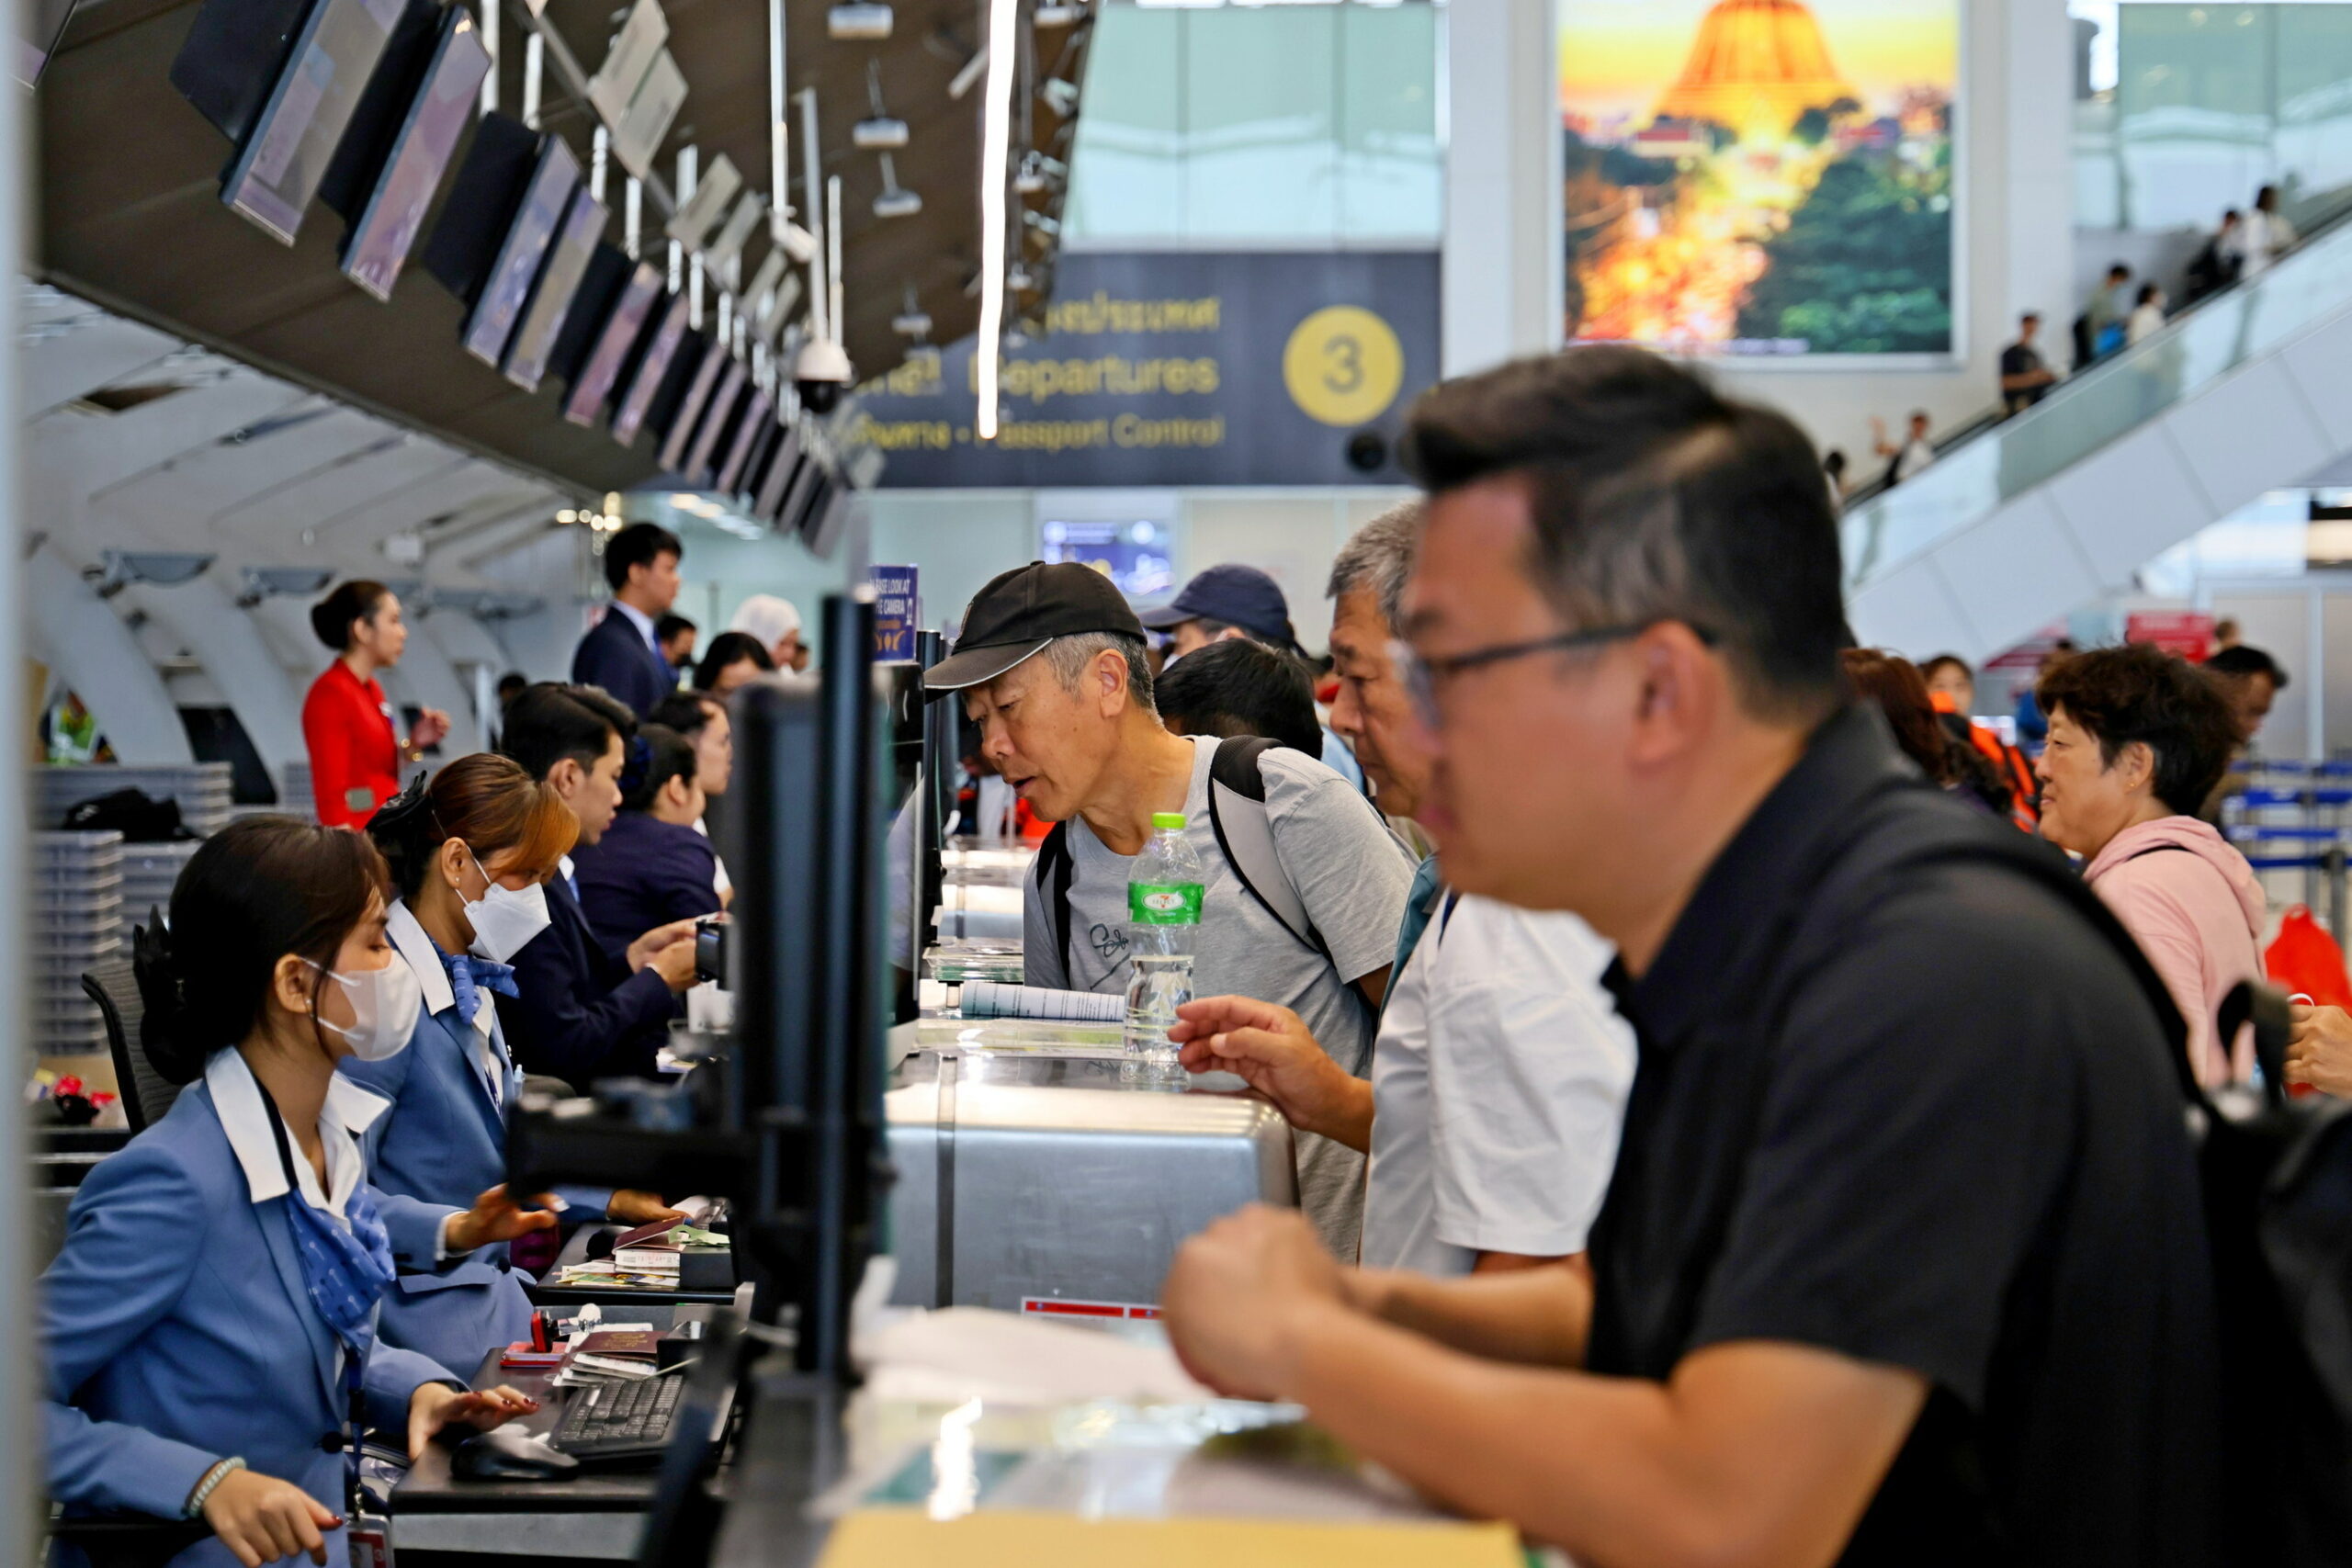 Chinese tourists check in at Suvarnabhumi Airport in Bangkok, Thailand during the Chinese New Year holiday. (Photo by Bai Yuanqi/People's Daily)